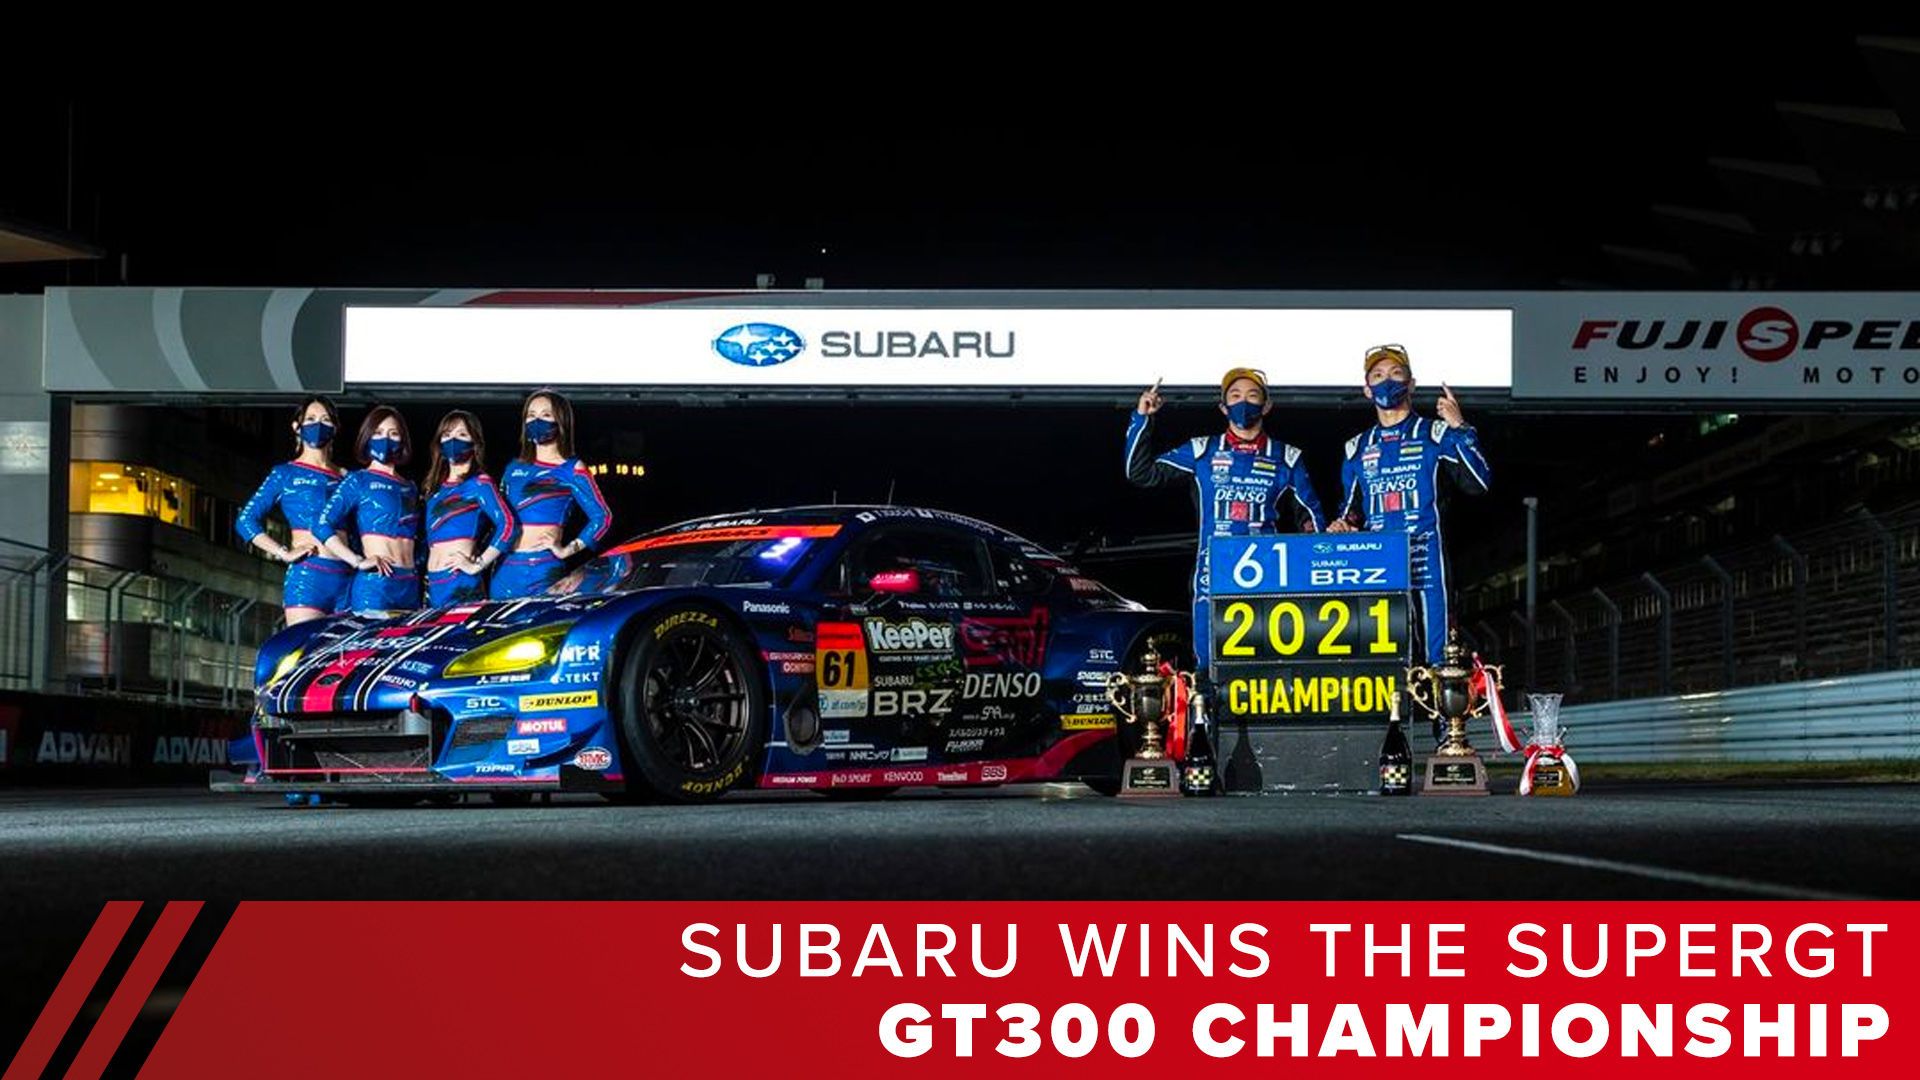 Subaru wins the GT300 Championship in Super GT - A title over 20 years in the making